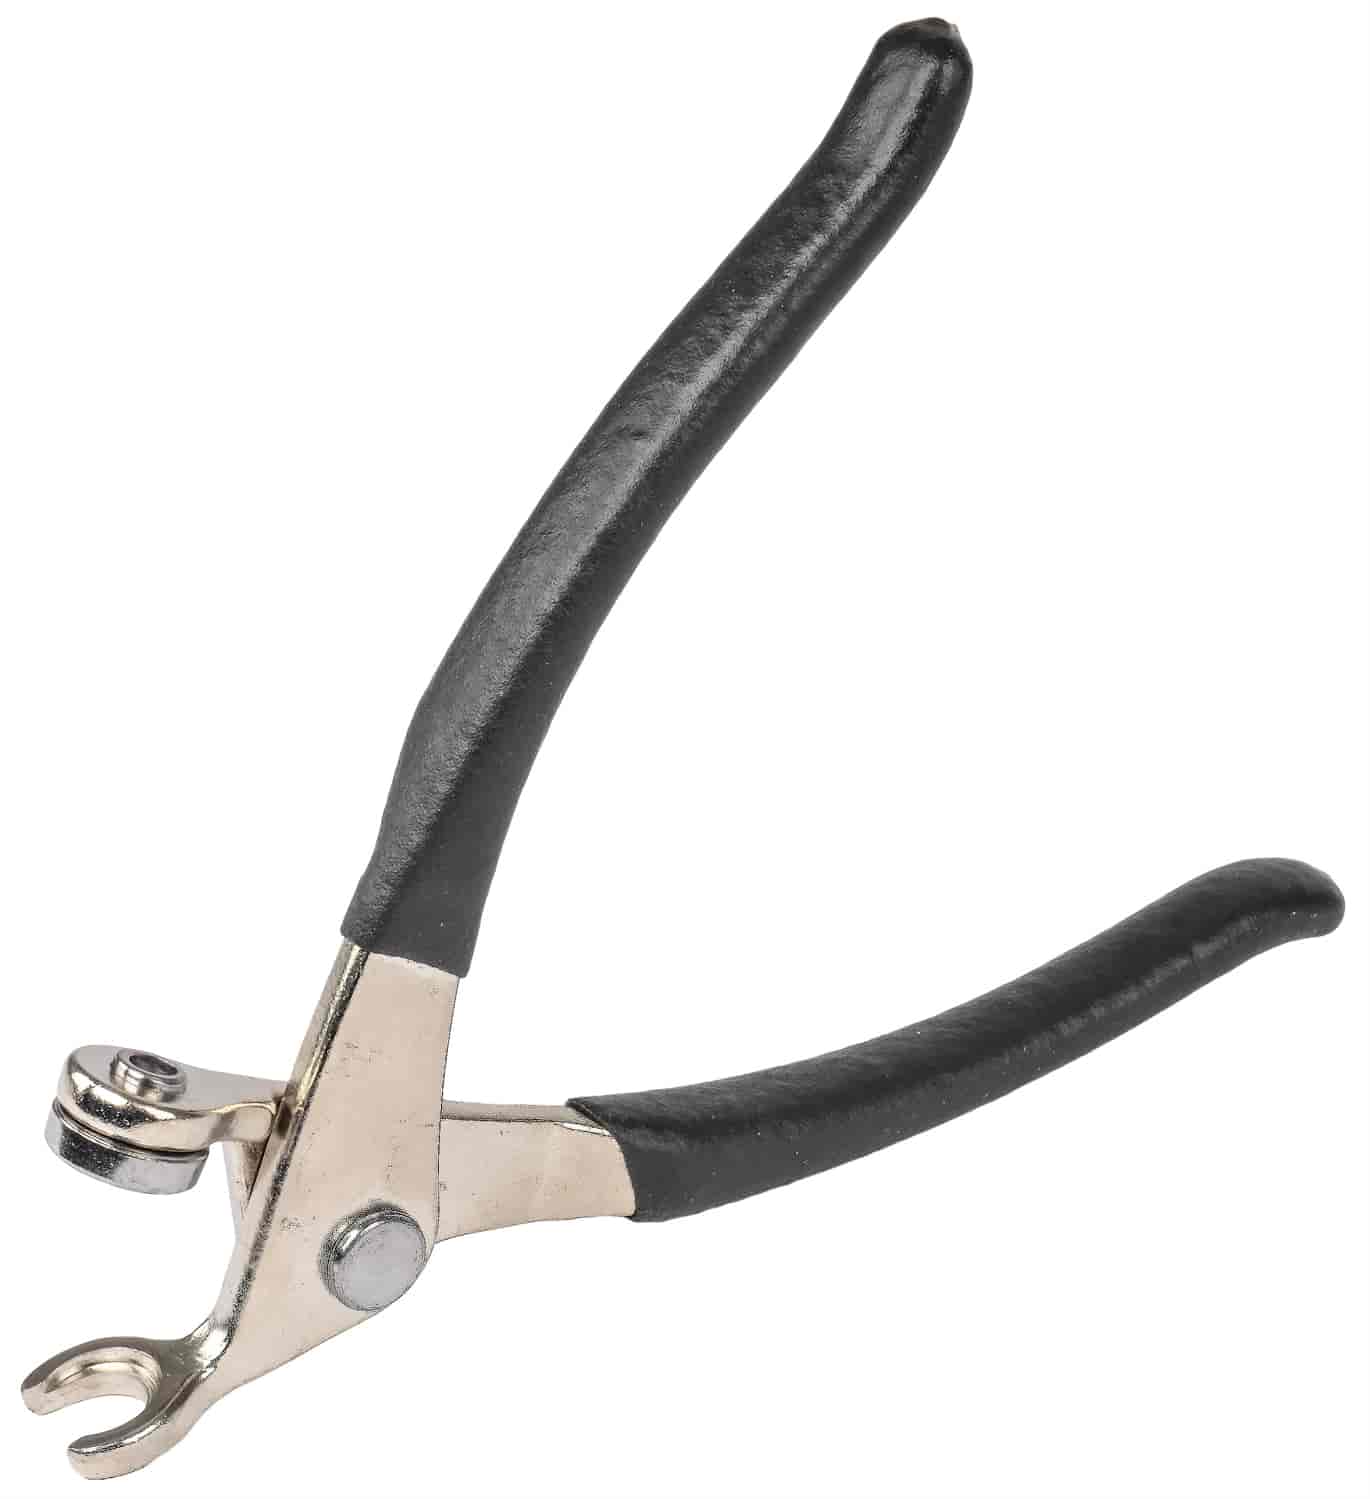 Cleco Fastener Pliers Required to Insert/Release Cleco Fasteners